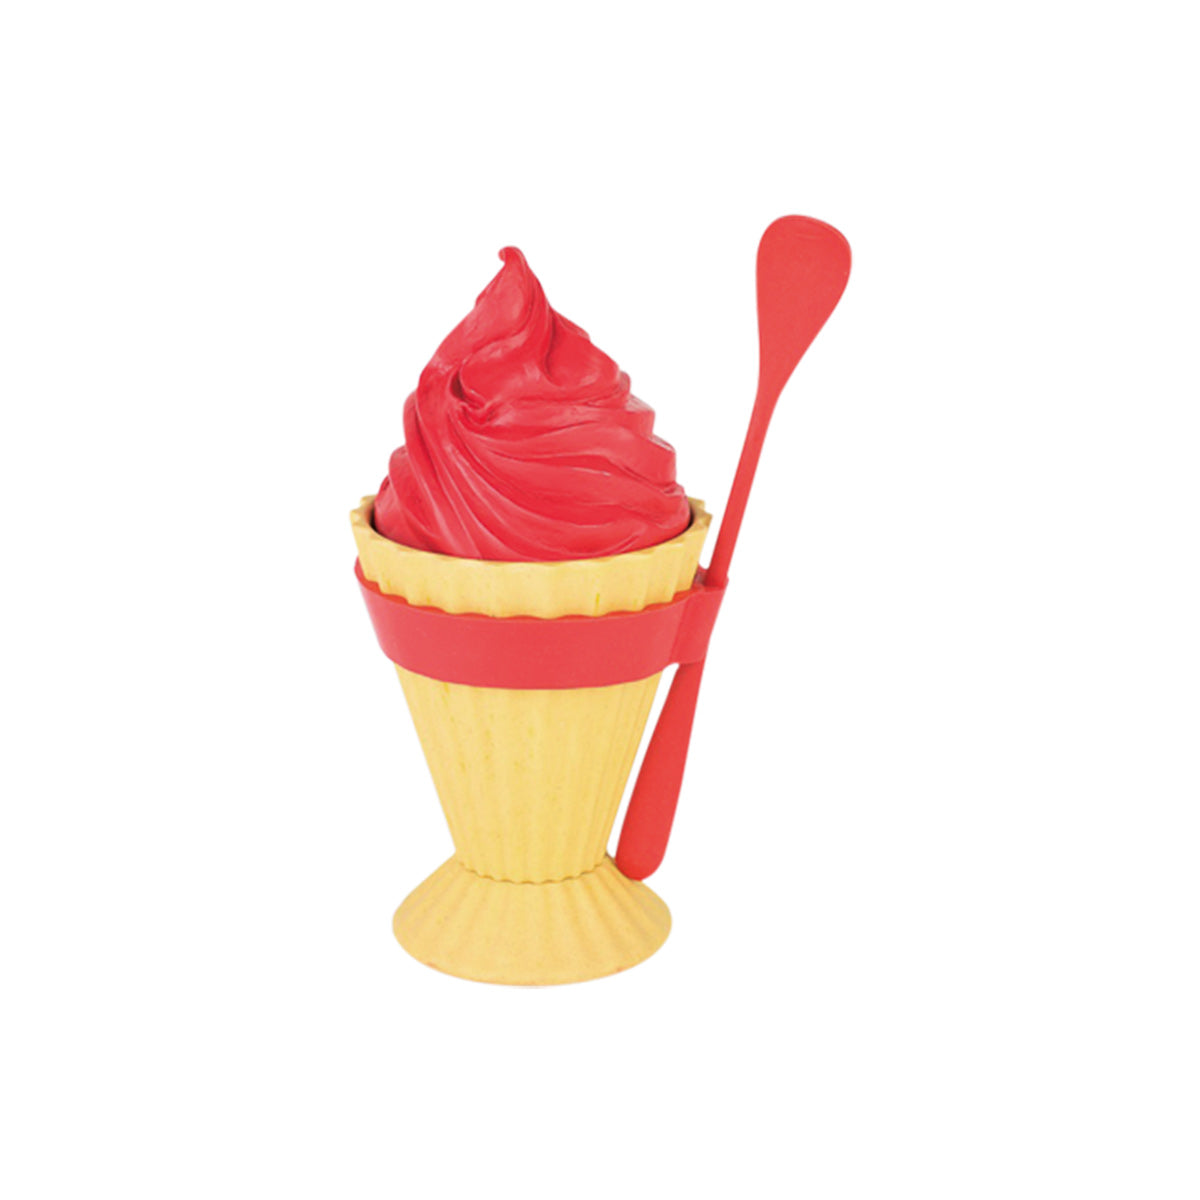 Ice cream nearter and eater by Peterson Housewares & Artwares